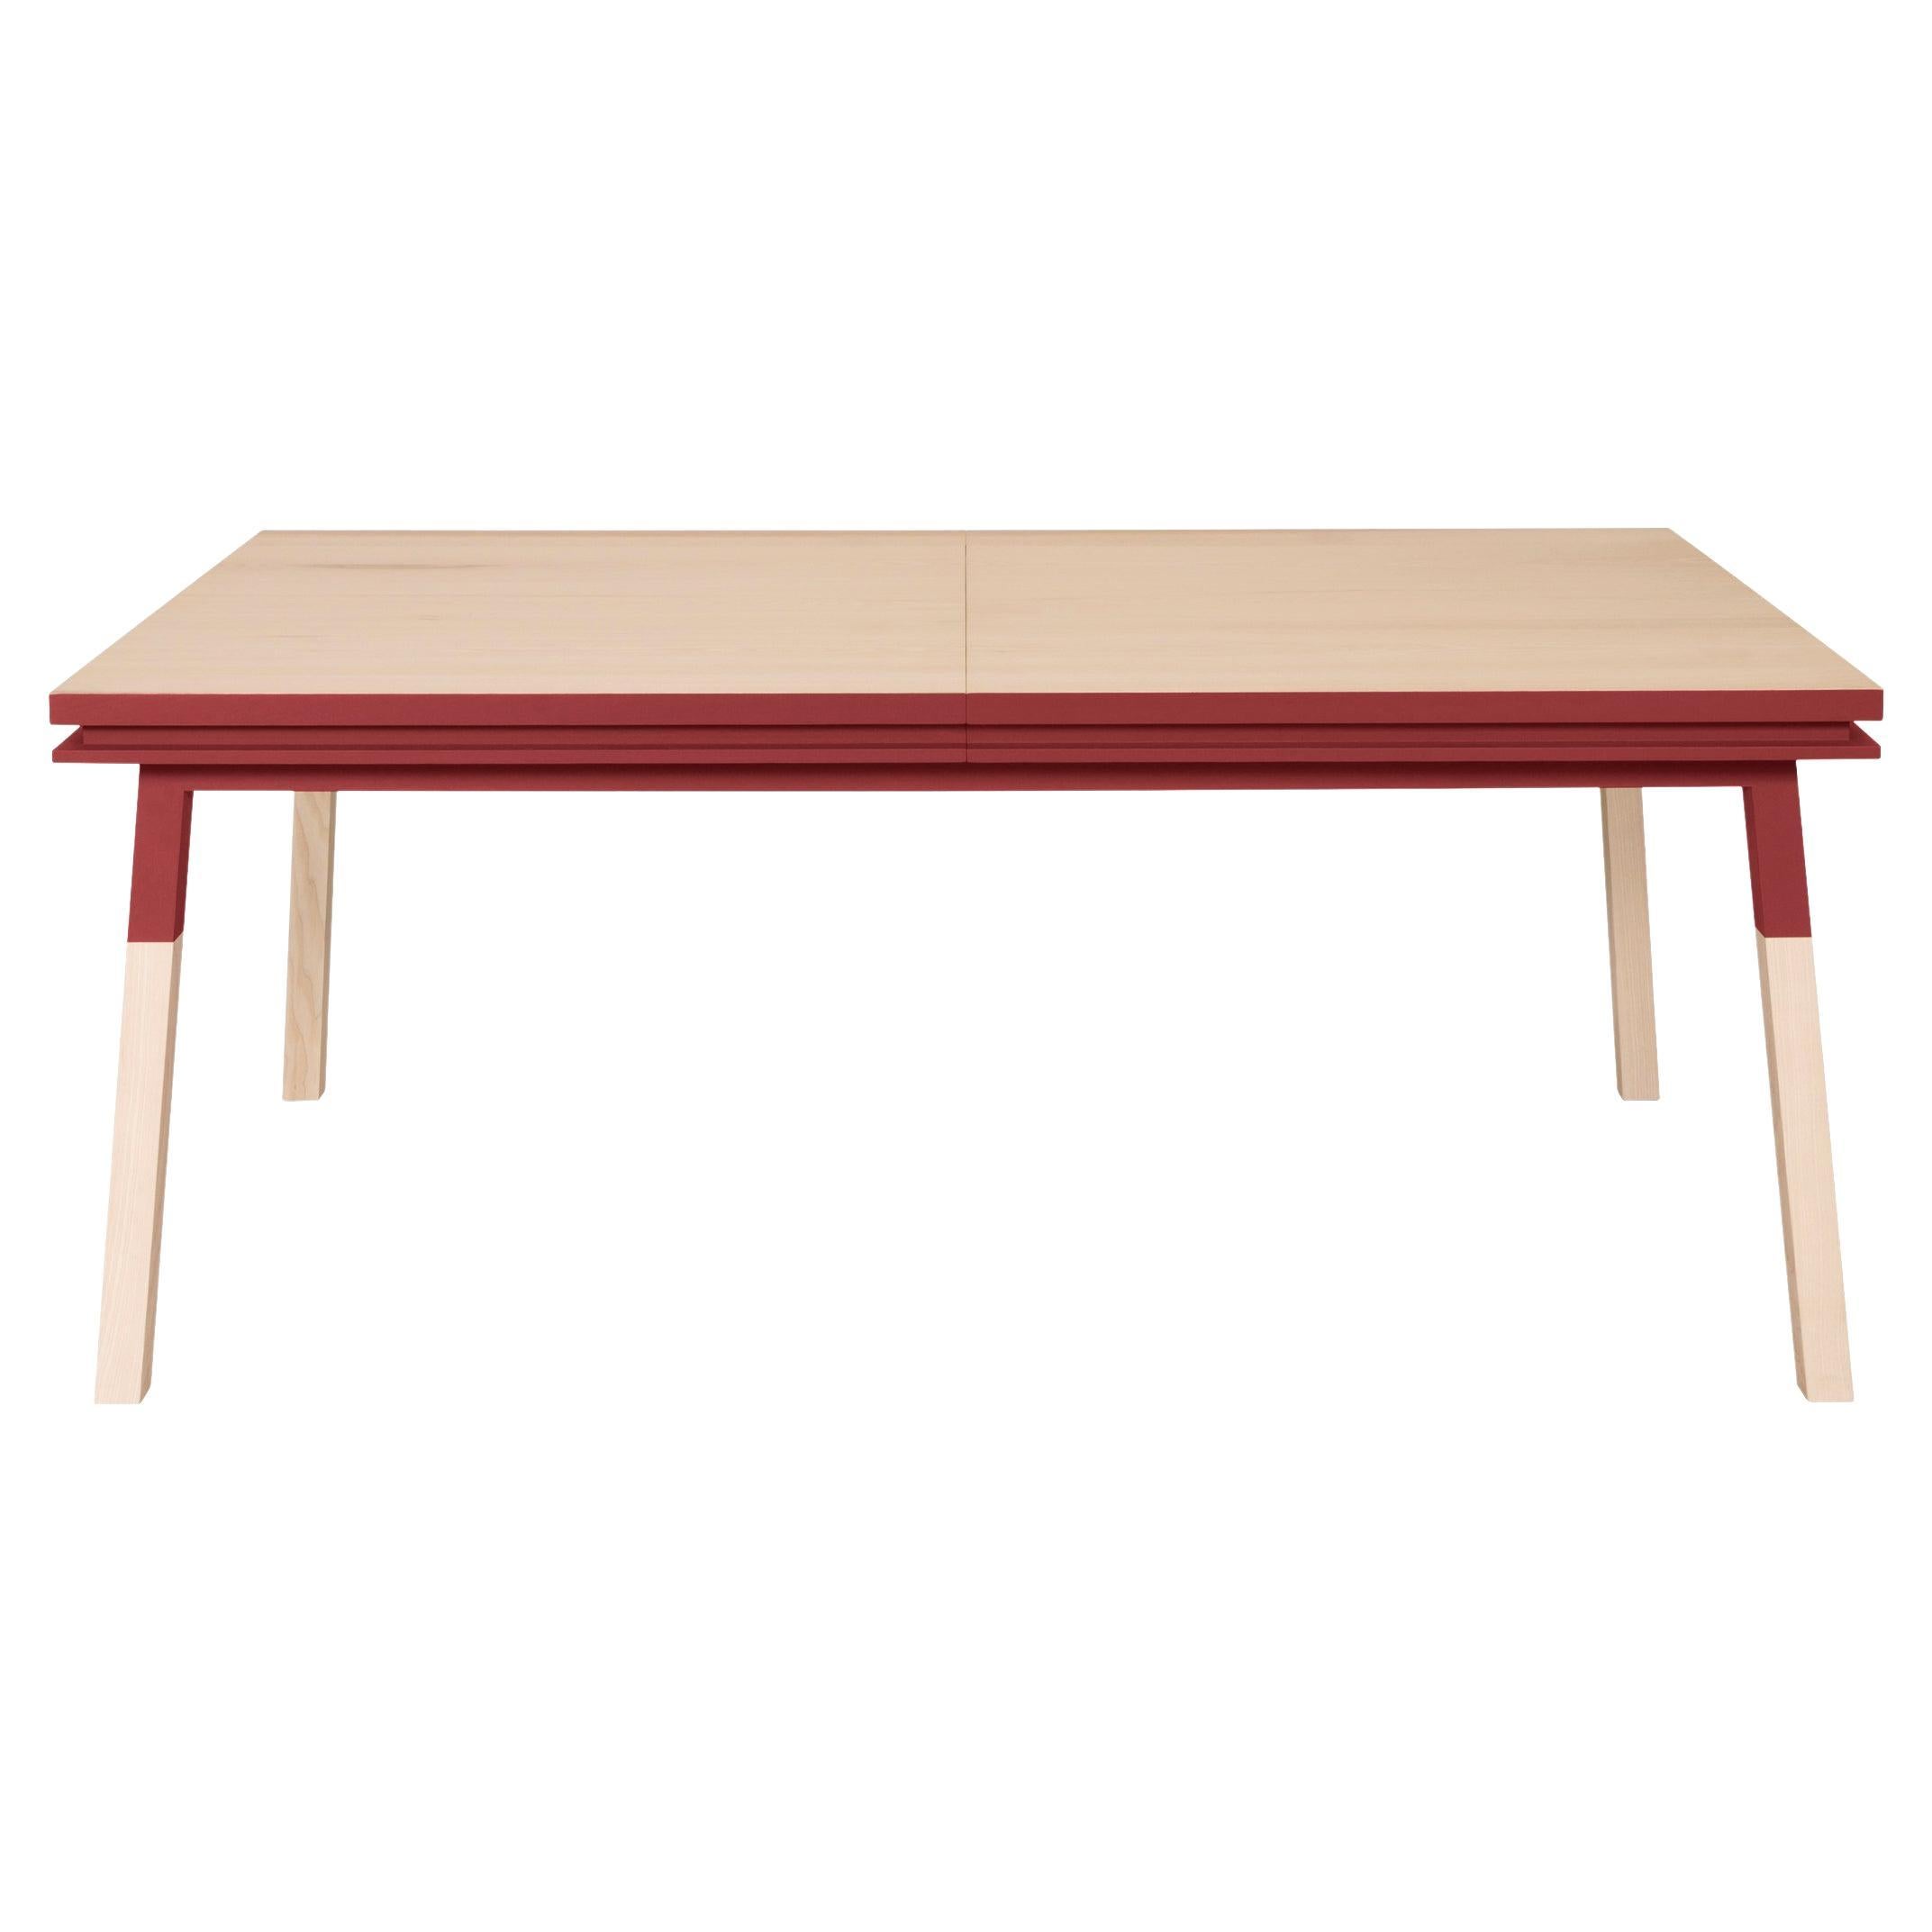 Red & natural wood extensible dining table in solid wood, design E. Gizard For Sale